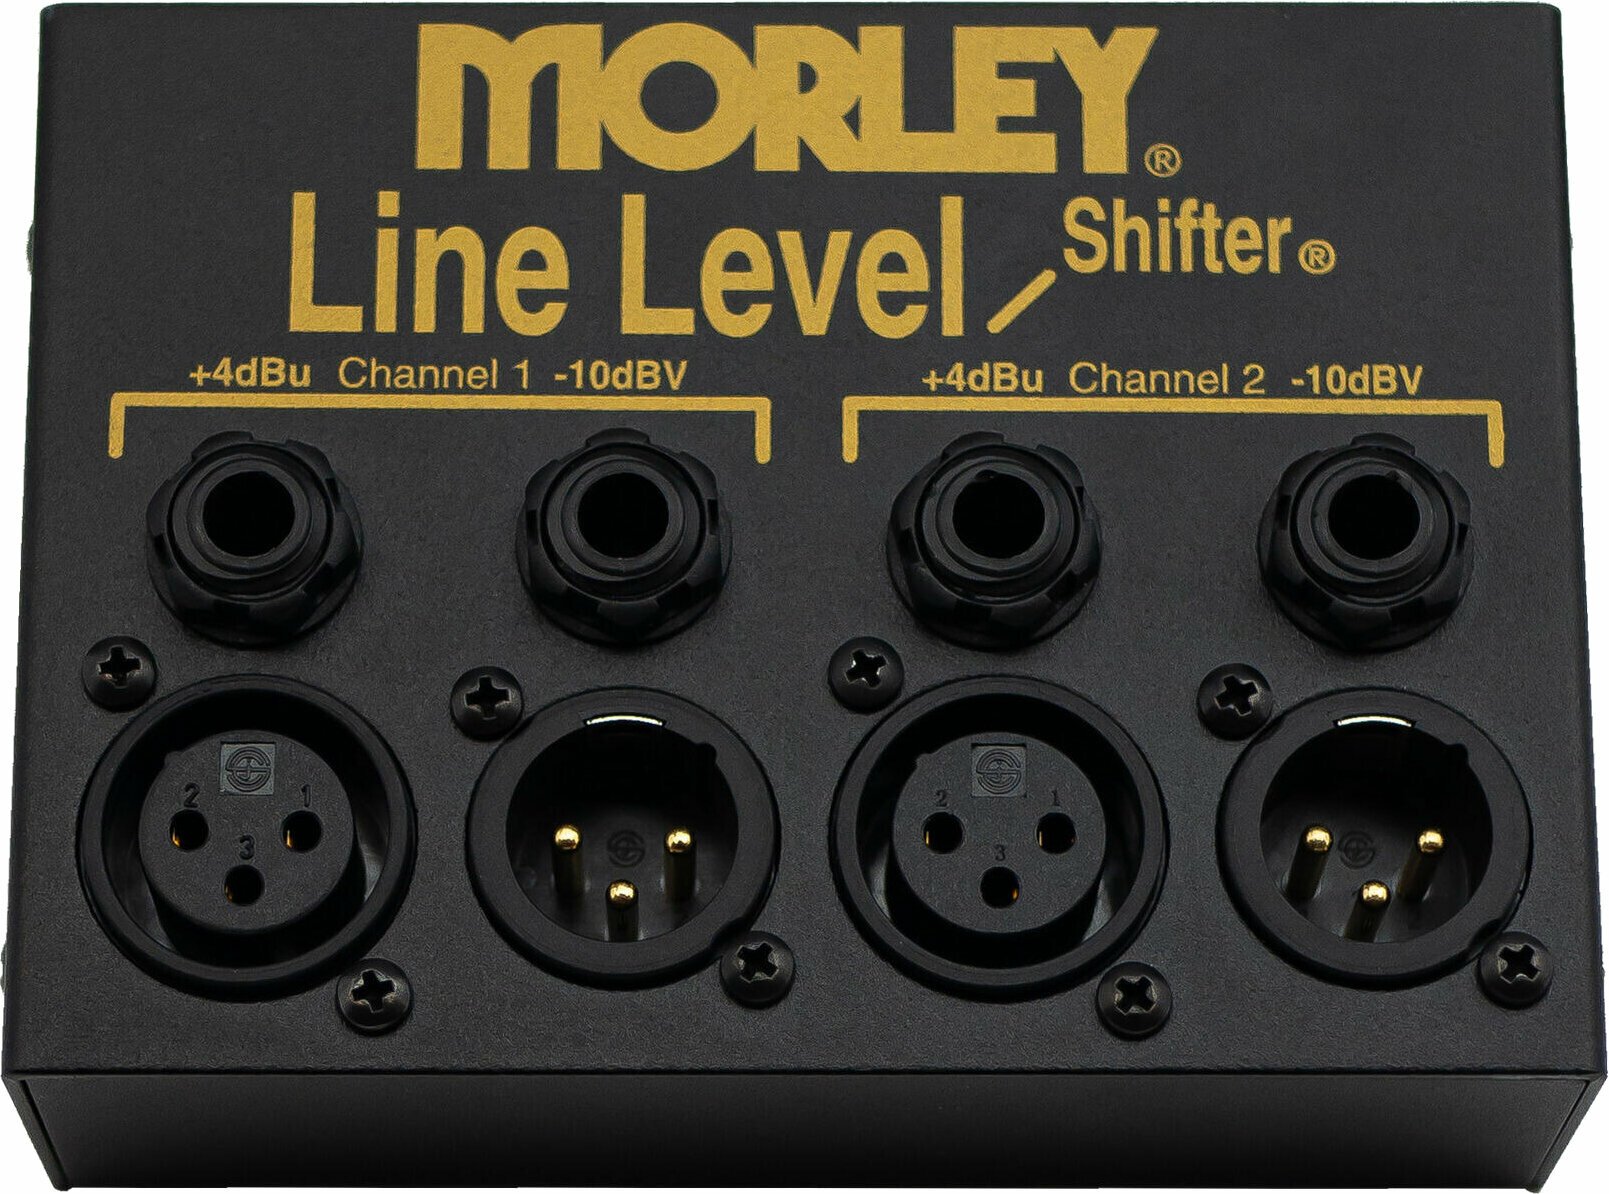 Accessories Morley Line Level Shifter (Just unboxed)